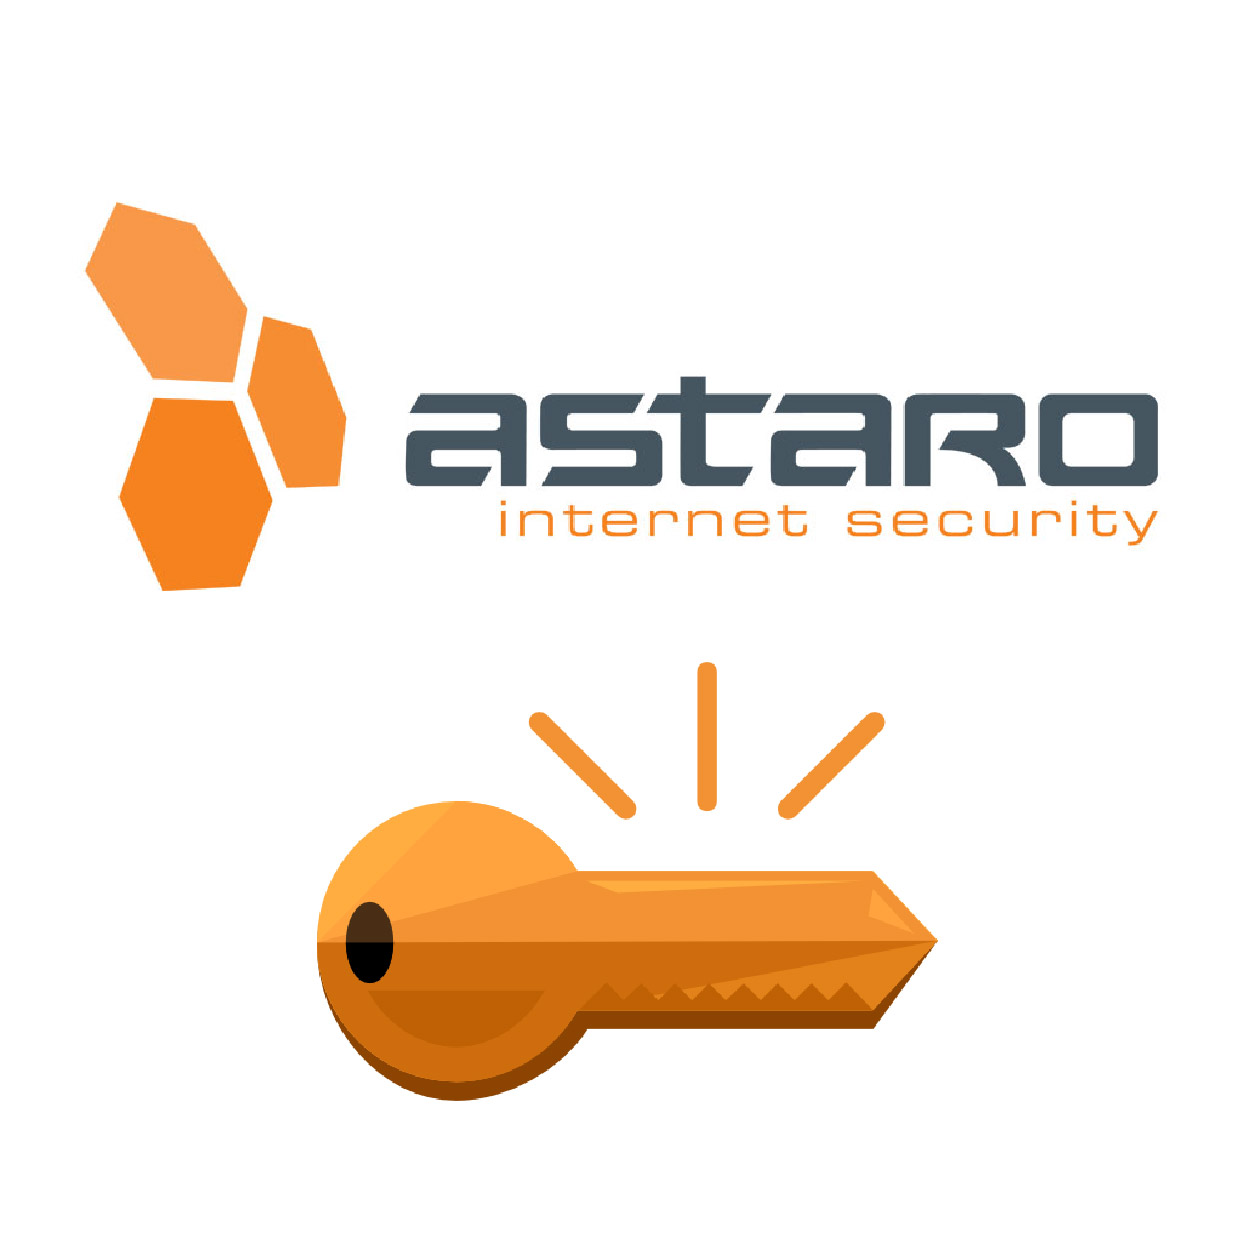 Astaro - Network Security Subscription for ASG 220 - Upgrading Key, Firewall